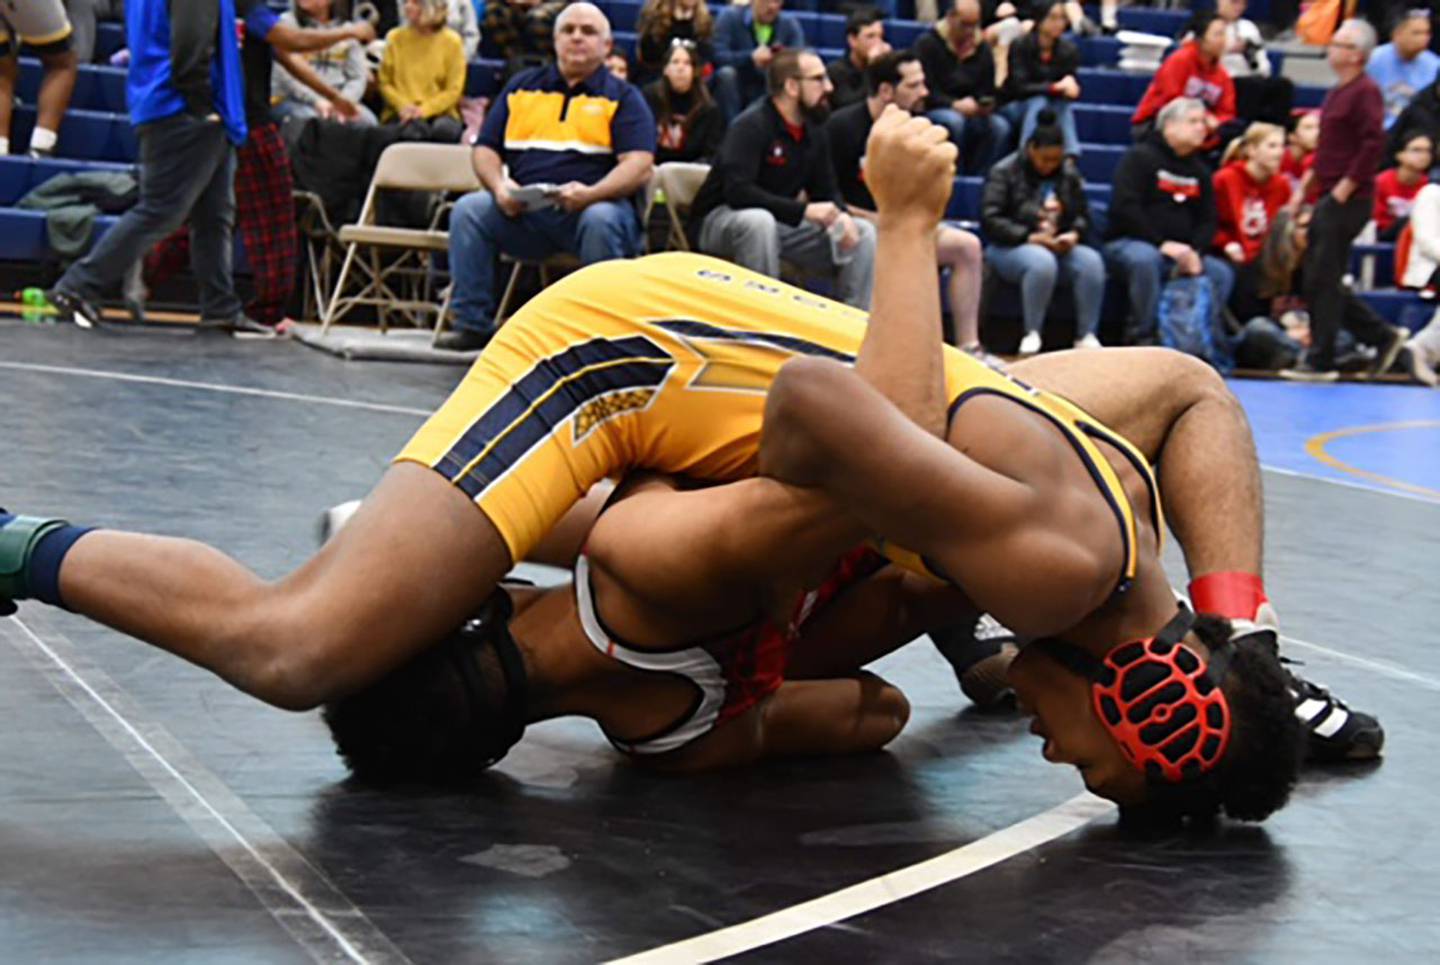 Perry Hall freshman Victor Marks-Jenkins (top) works for one of his 38 pins within his record of 46-0 at 145 pounds heading into this weekend's Class 4A-3A state tournament at Show Place Arena in Upper Marlboro.